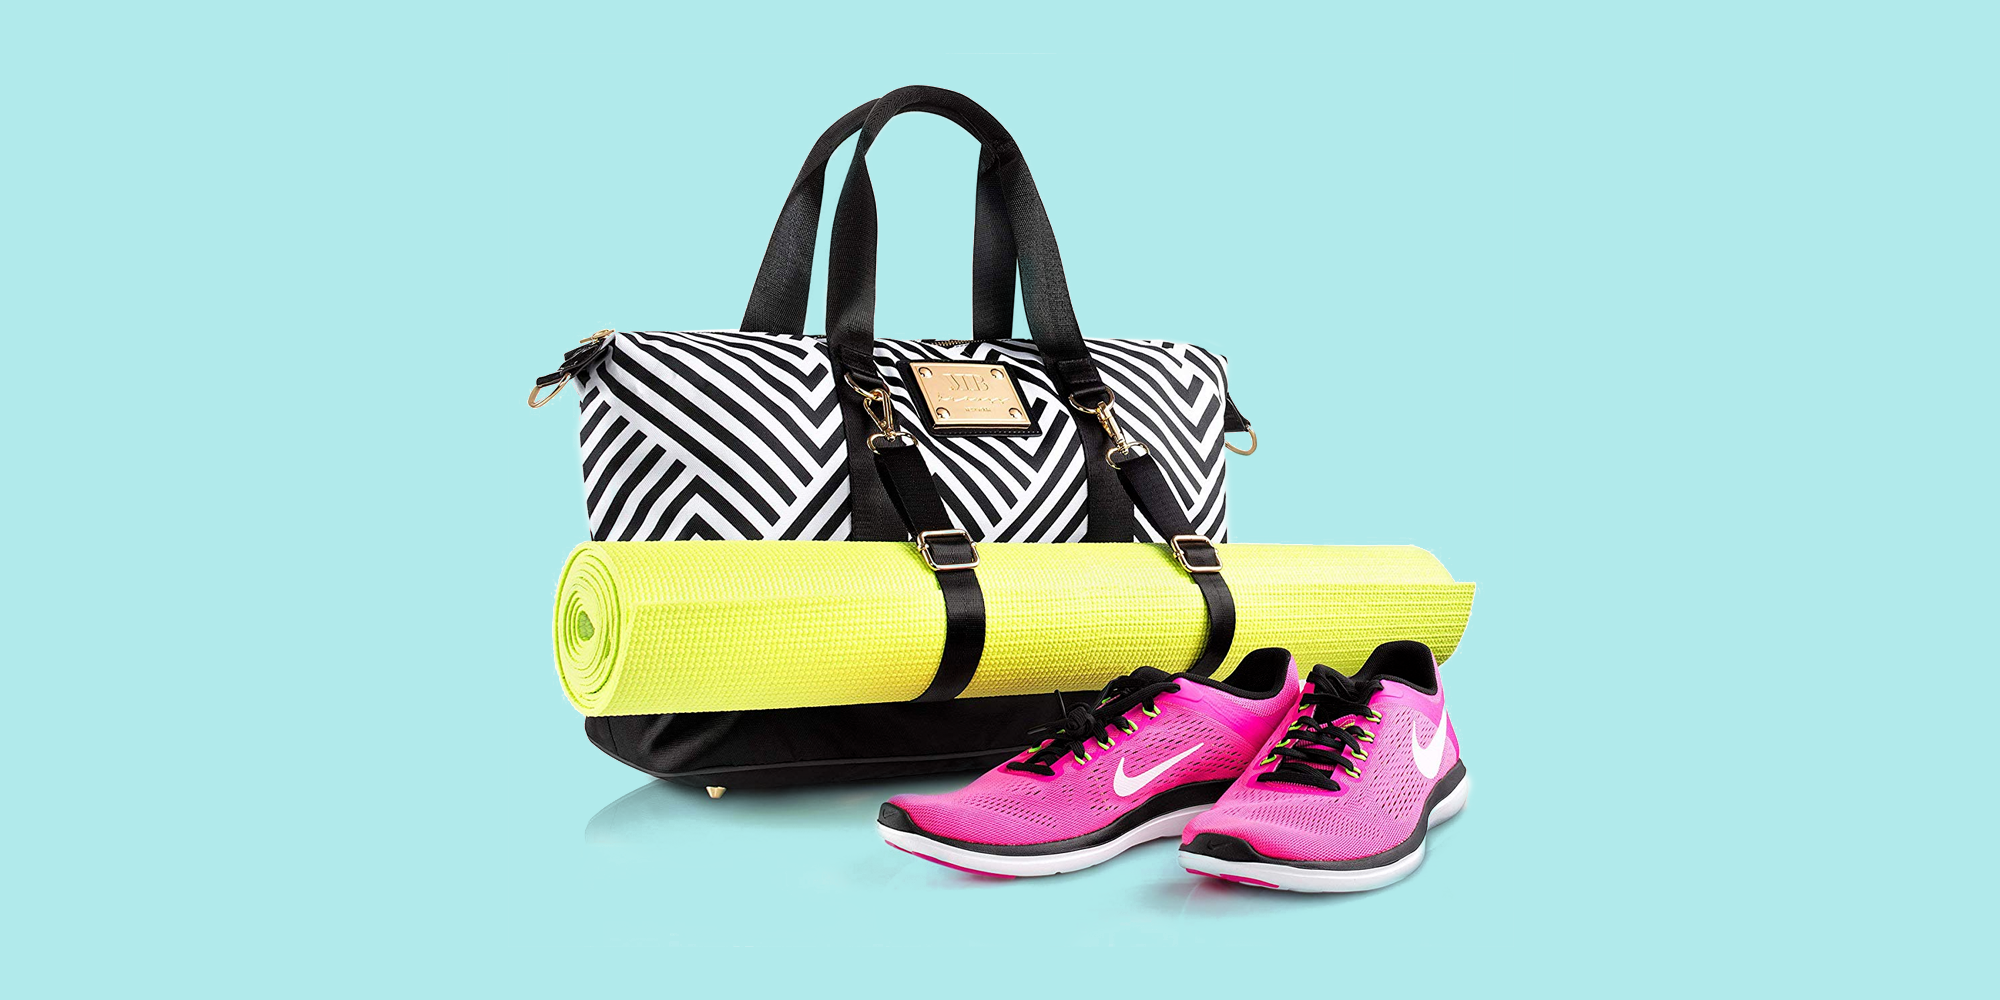 Yoga Large Yoga Bags and Carriers Fits All Your Stuff Yoga Accessories  Green 